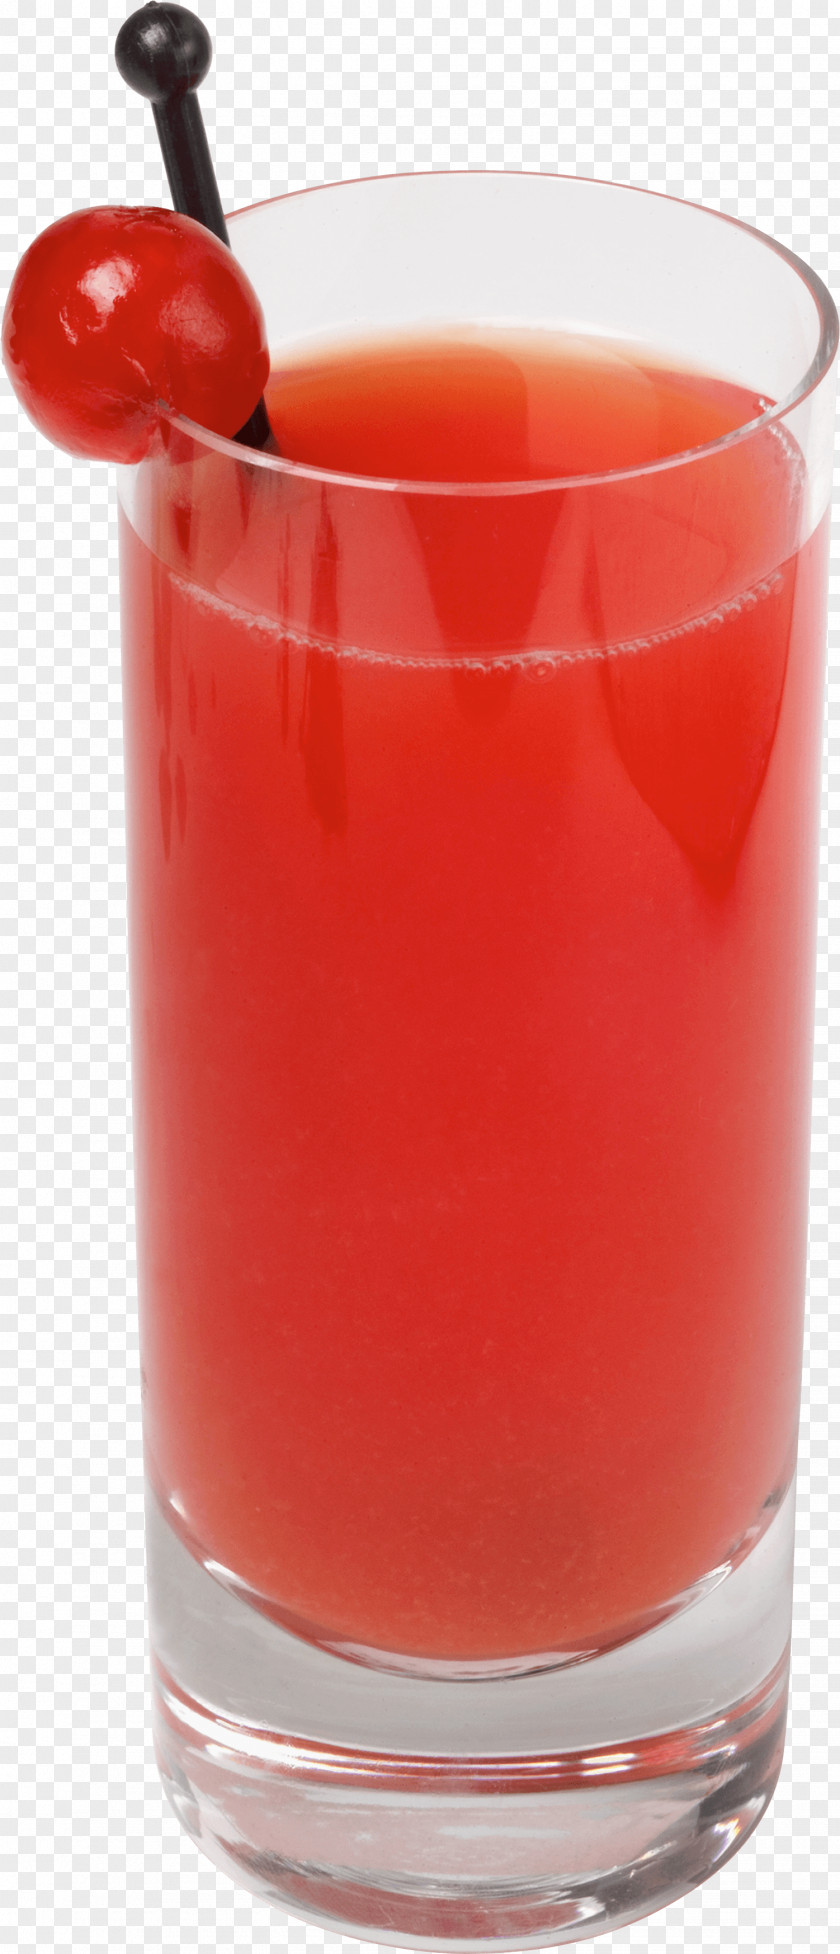 Red Juice Image Orange Cocktail Tomato Strawberry PNG